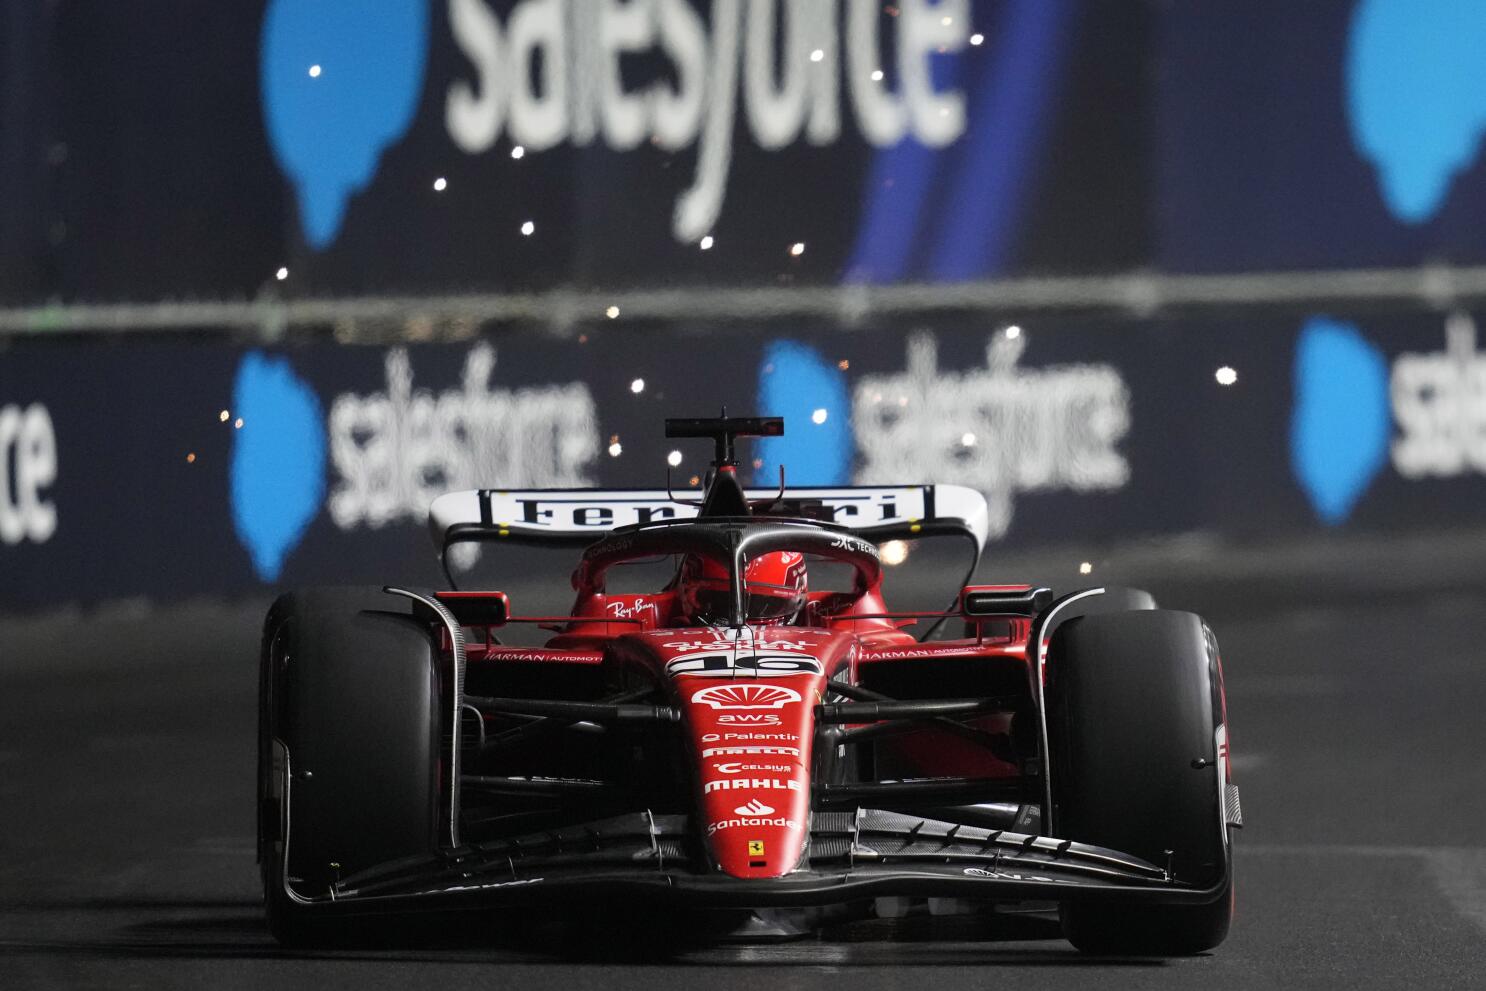 Ferrari sweeps qualifying for Las Vegas Grand Prix, but penalty to